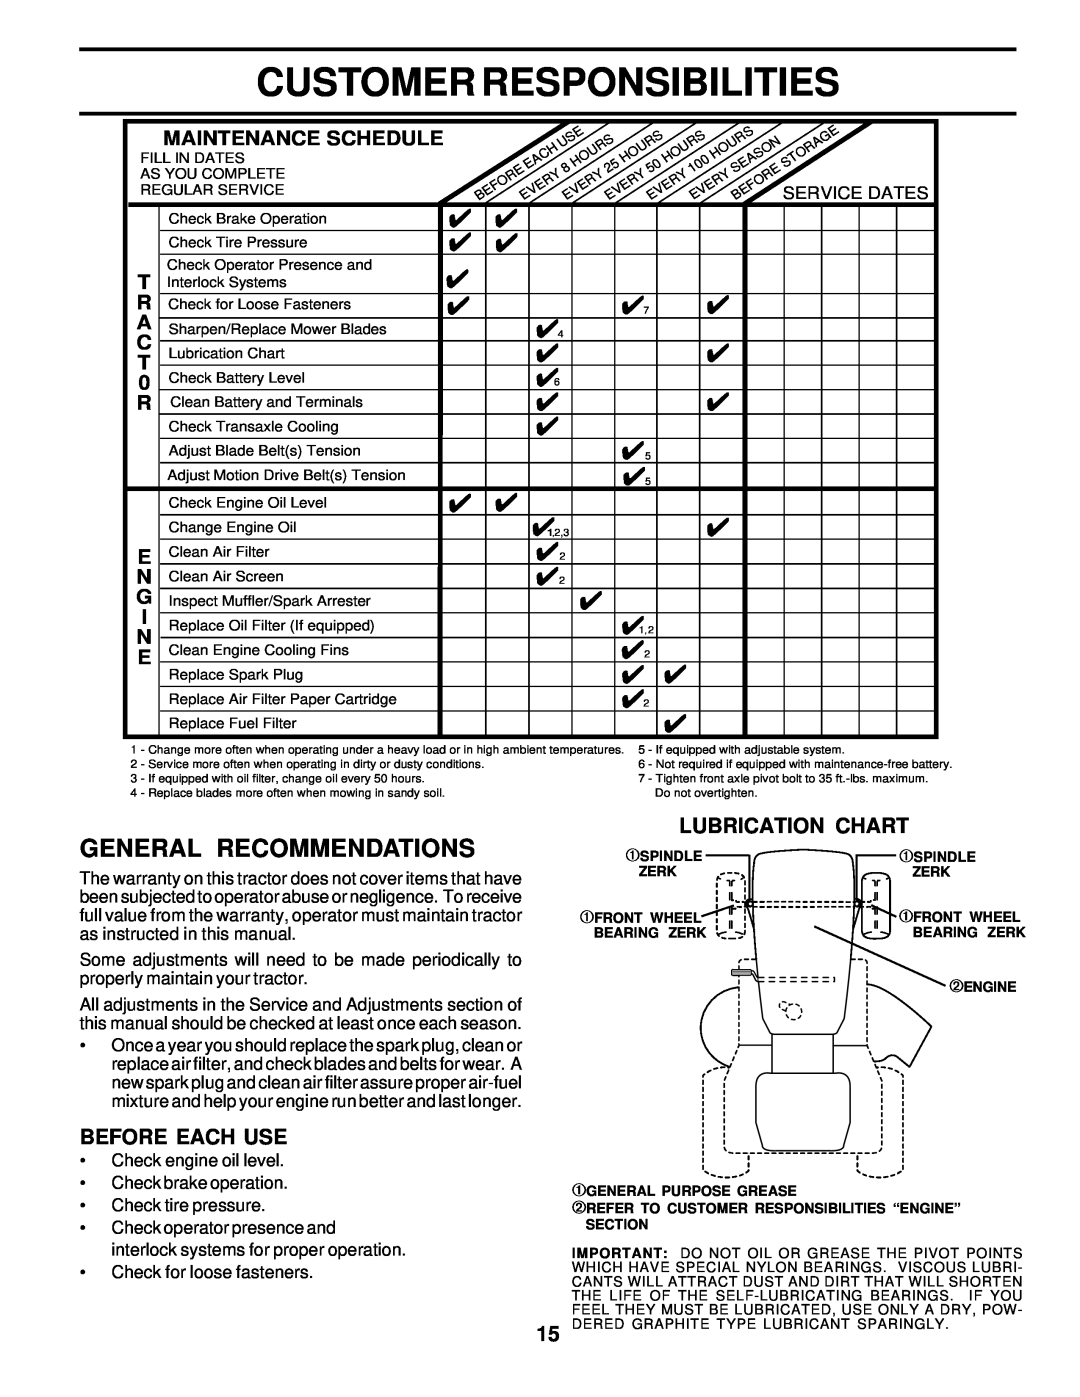 Poulan 178227 Customer Responsibilities, General Recommendations, Before Each Use, Lubrication Chart, Maintenance Schedule 